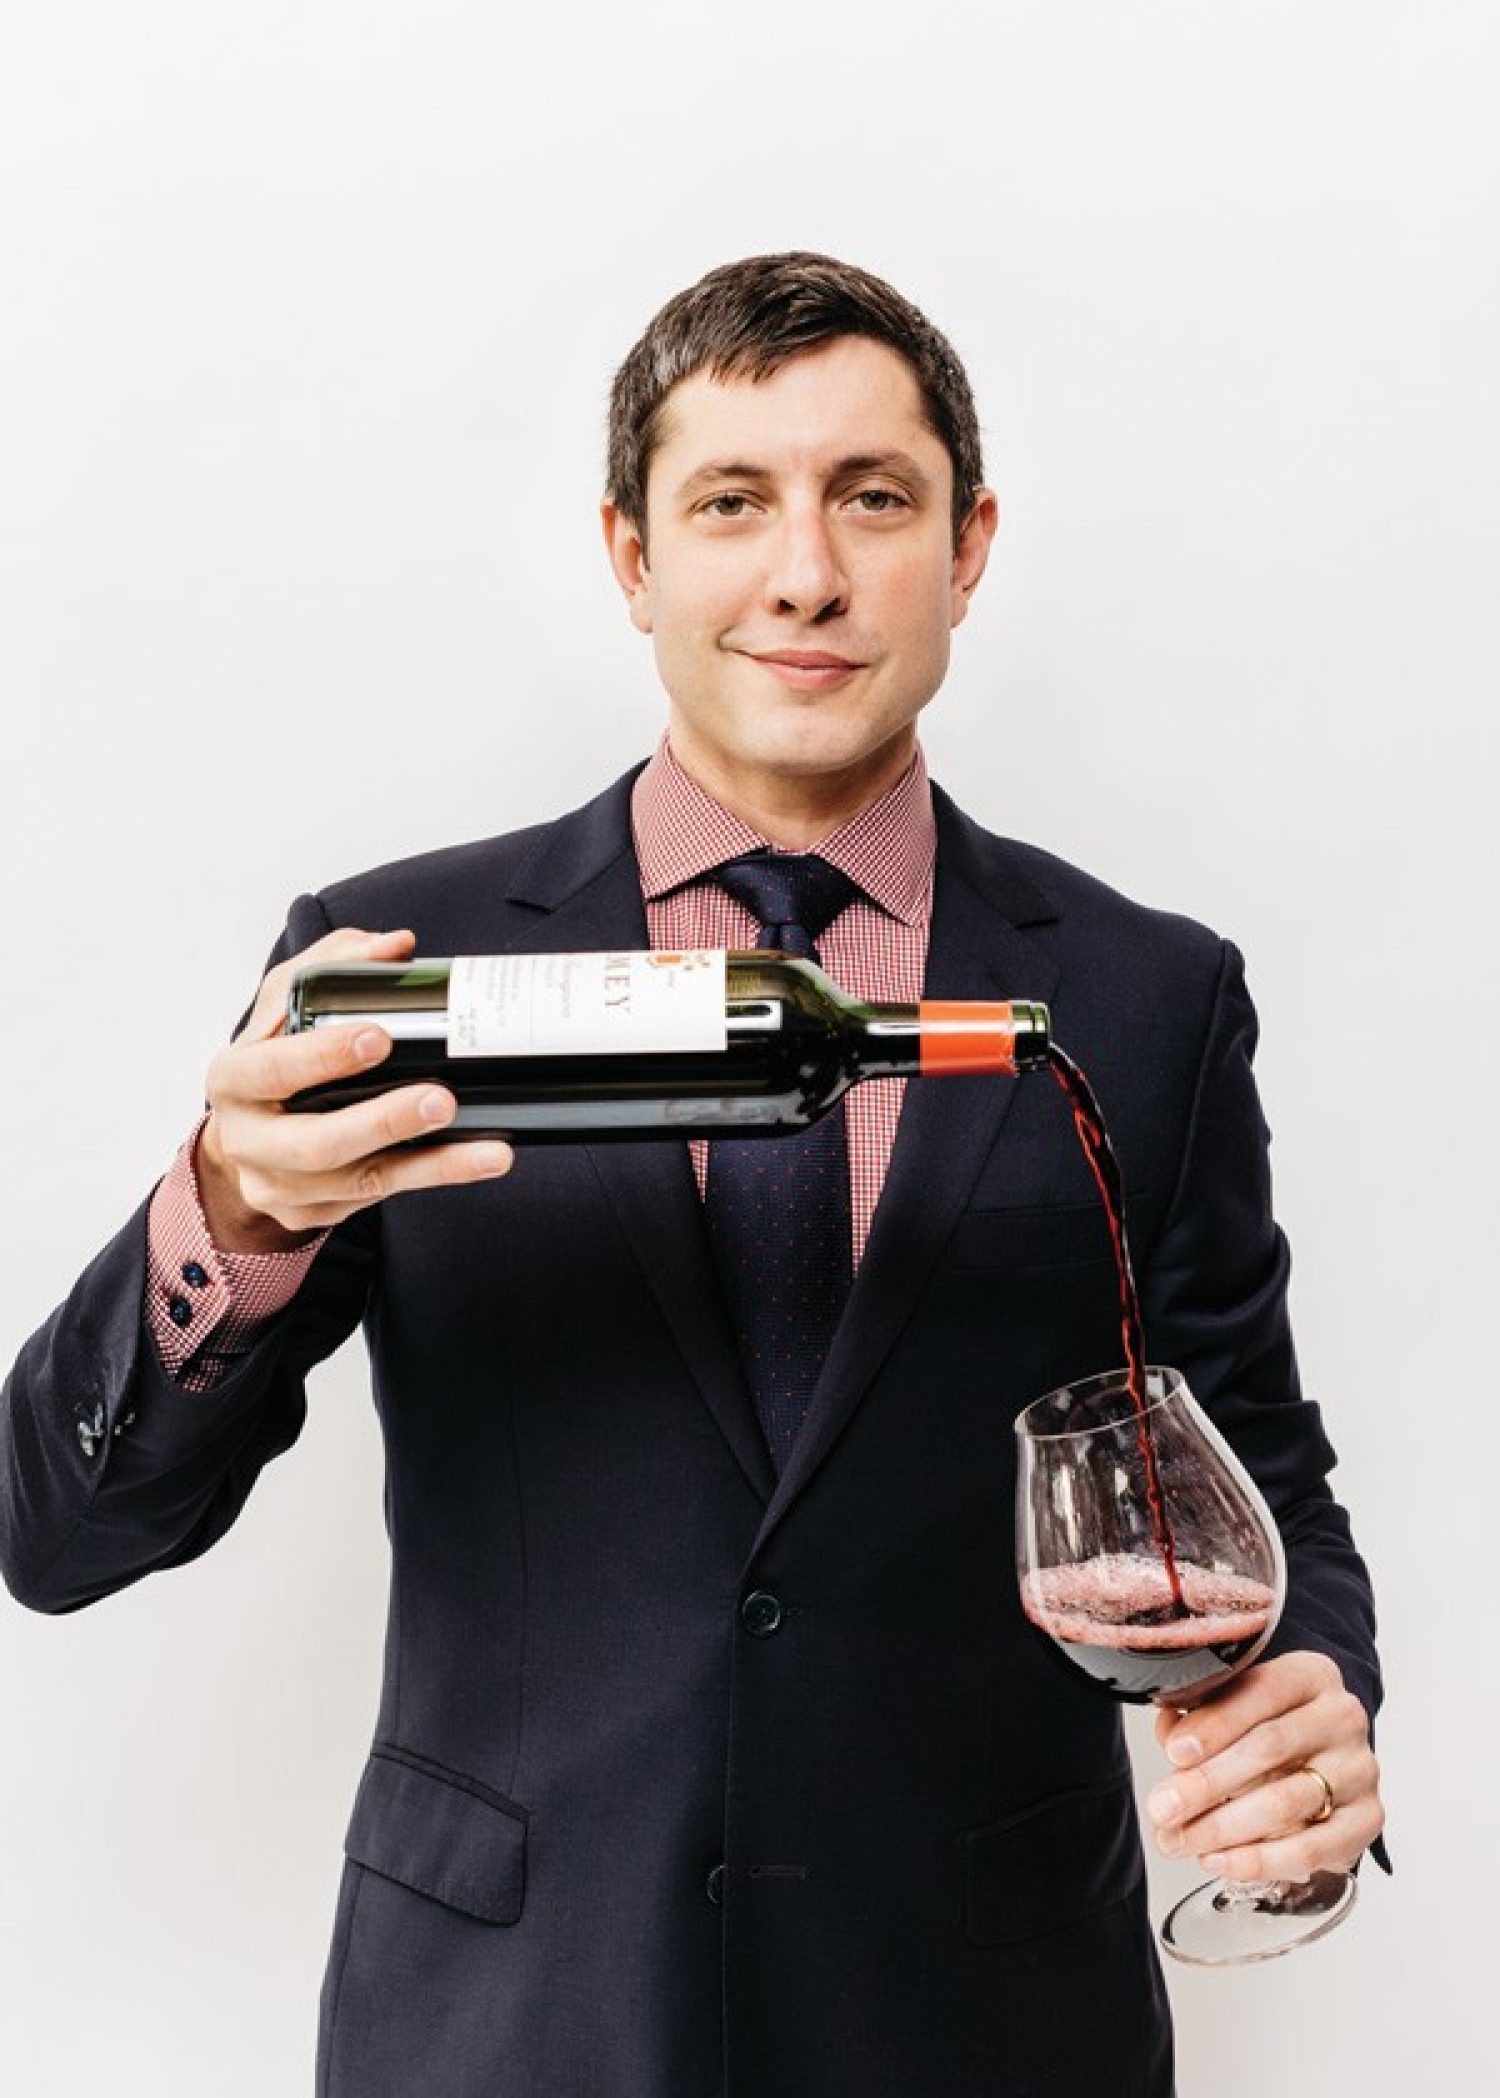 Master sommelier Brahm Callahan with a glass of red wine